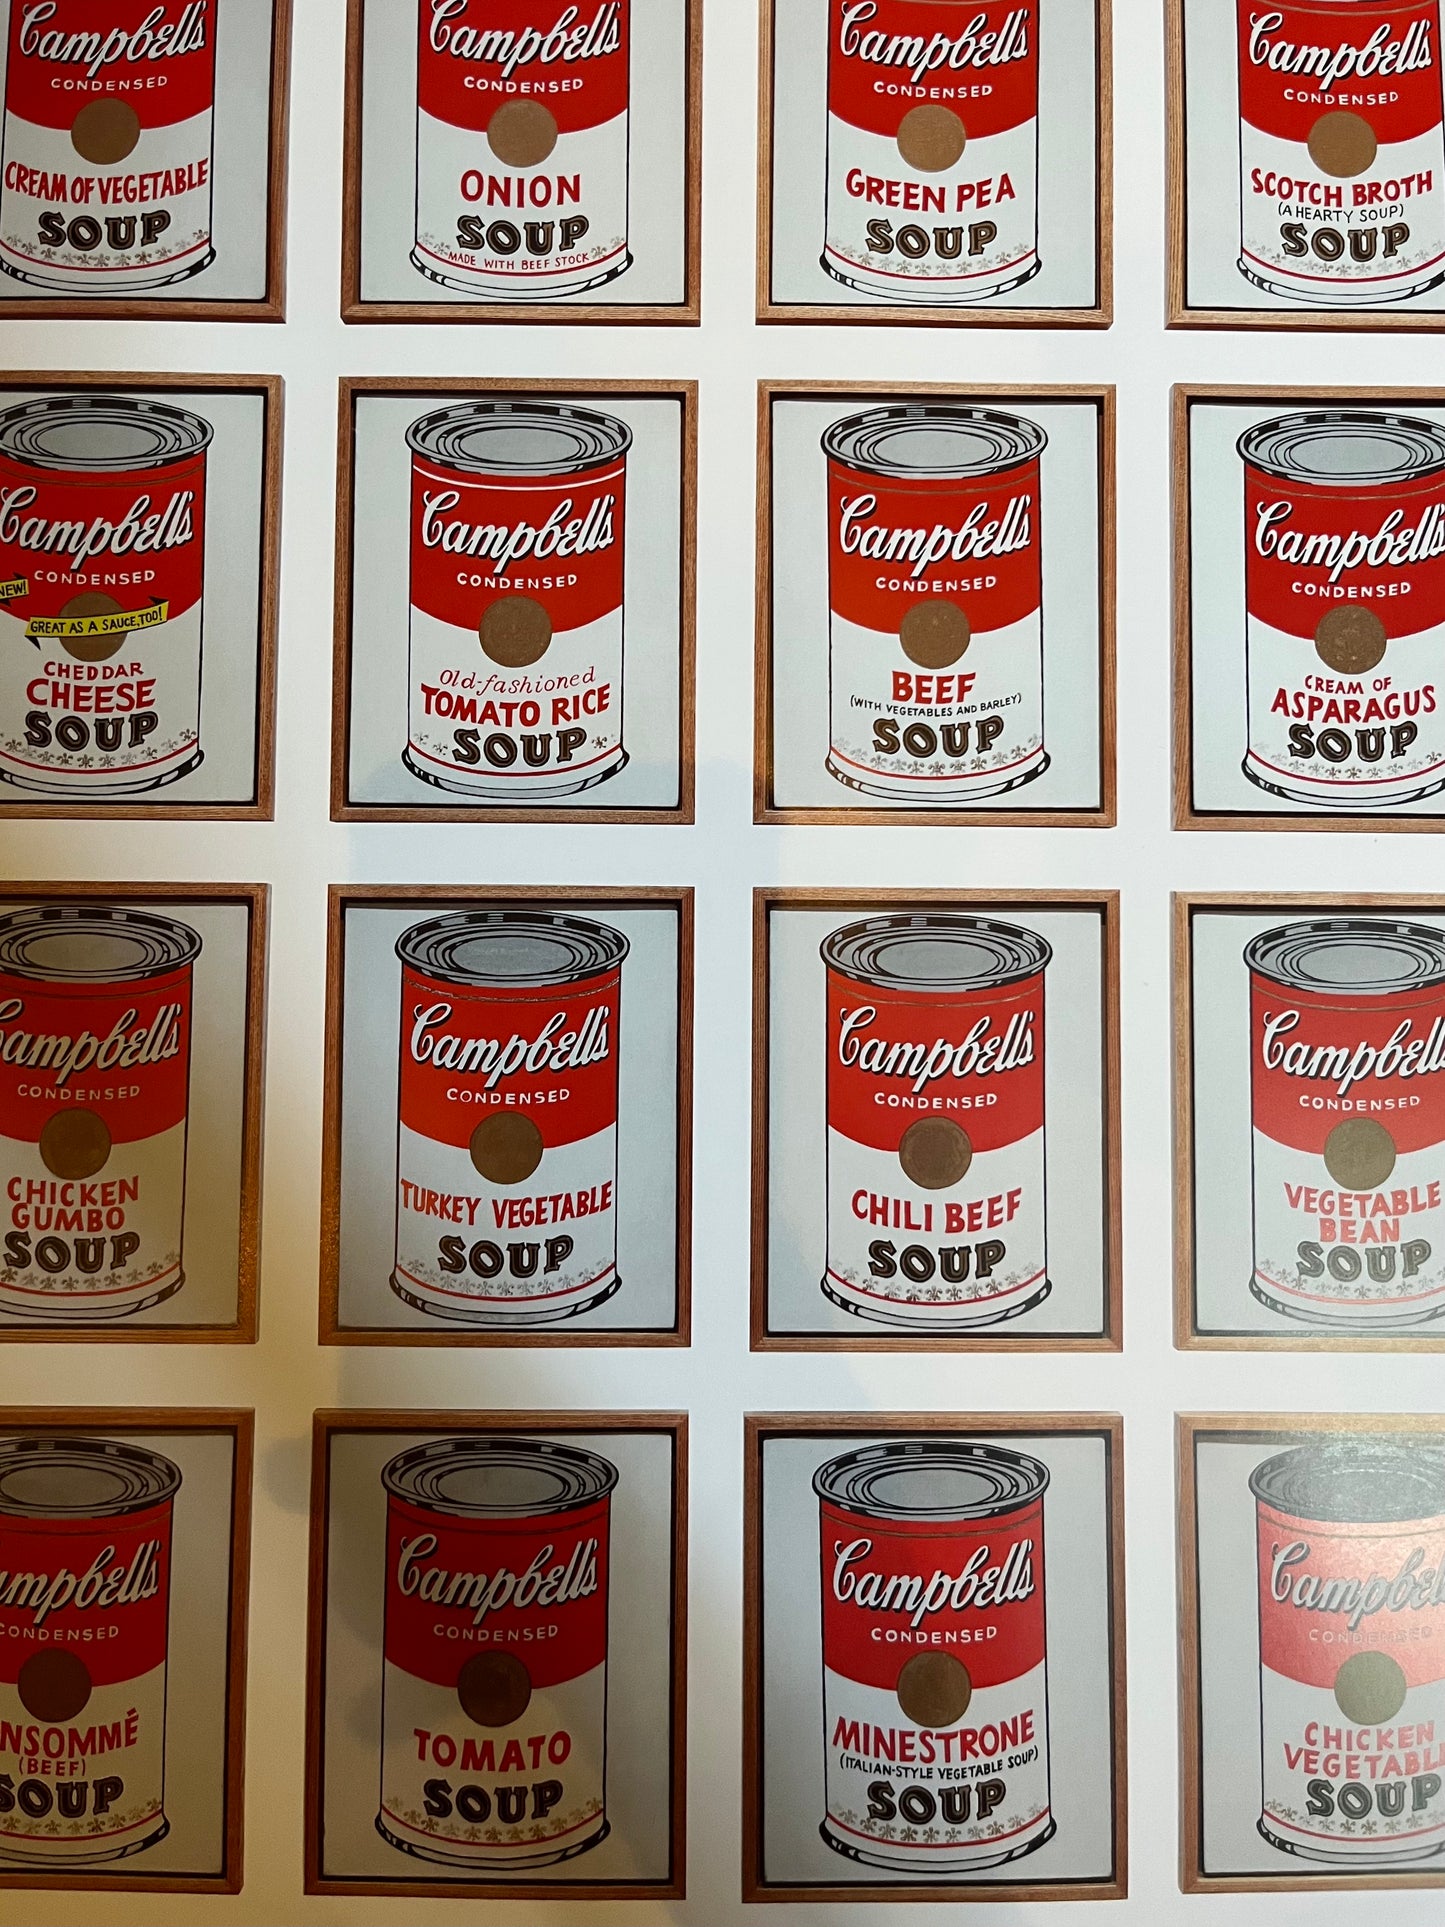 Andy Warhol, Campbell's Soup Cans (1962), Offsetlithographie